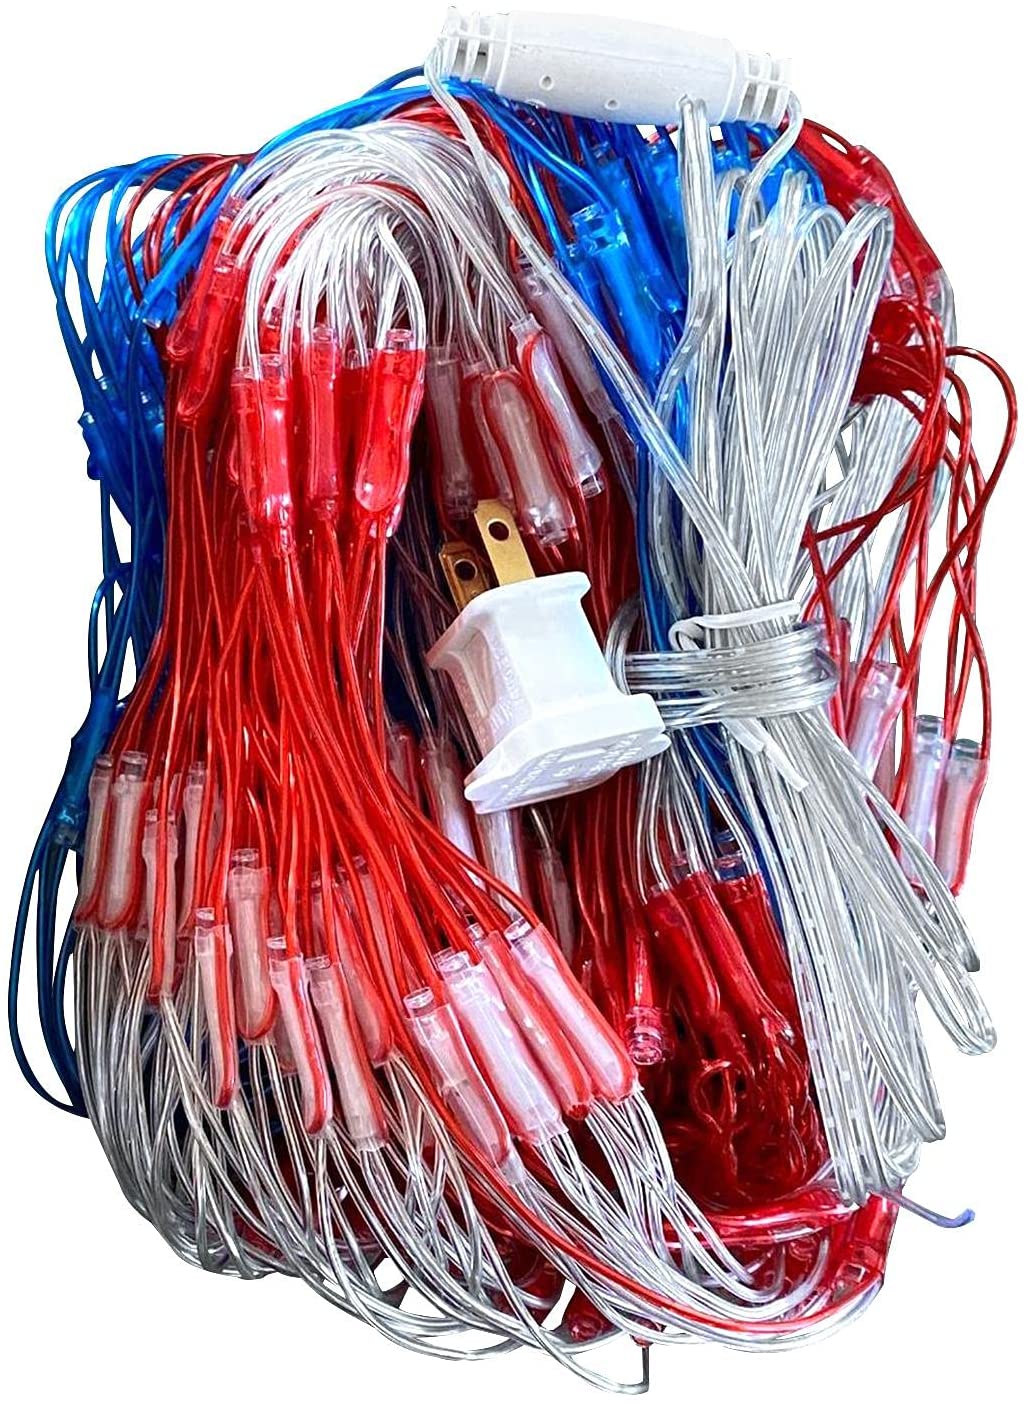 American Flag Light,390/420 Super Bright LEDs Flag Net Light, IP44 Waterproof String Light, US Flag Light for Independence Day Yard Garden Party Christmas Decorations - image 1 of 3